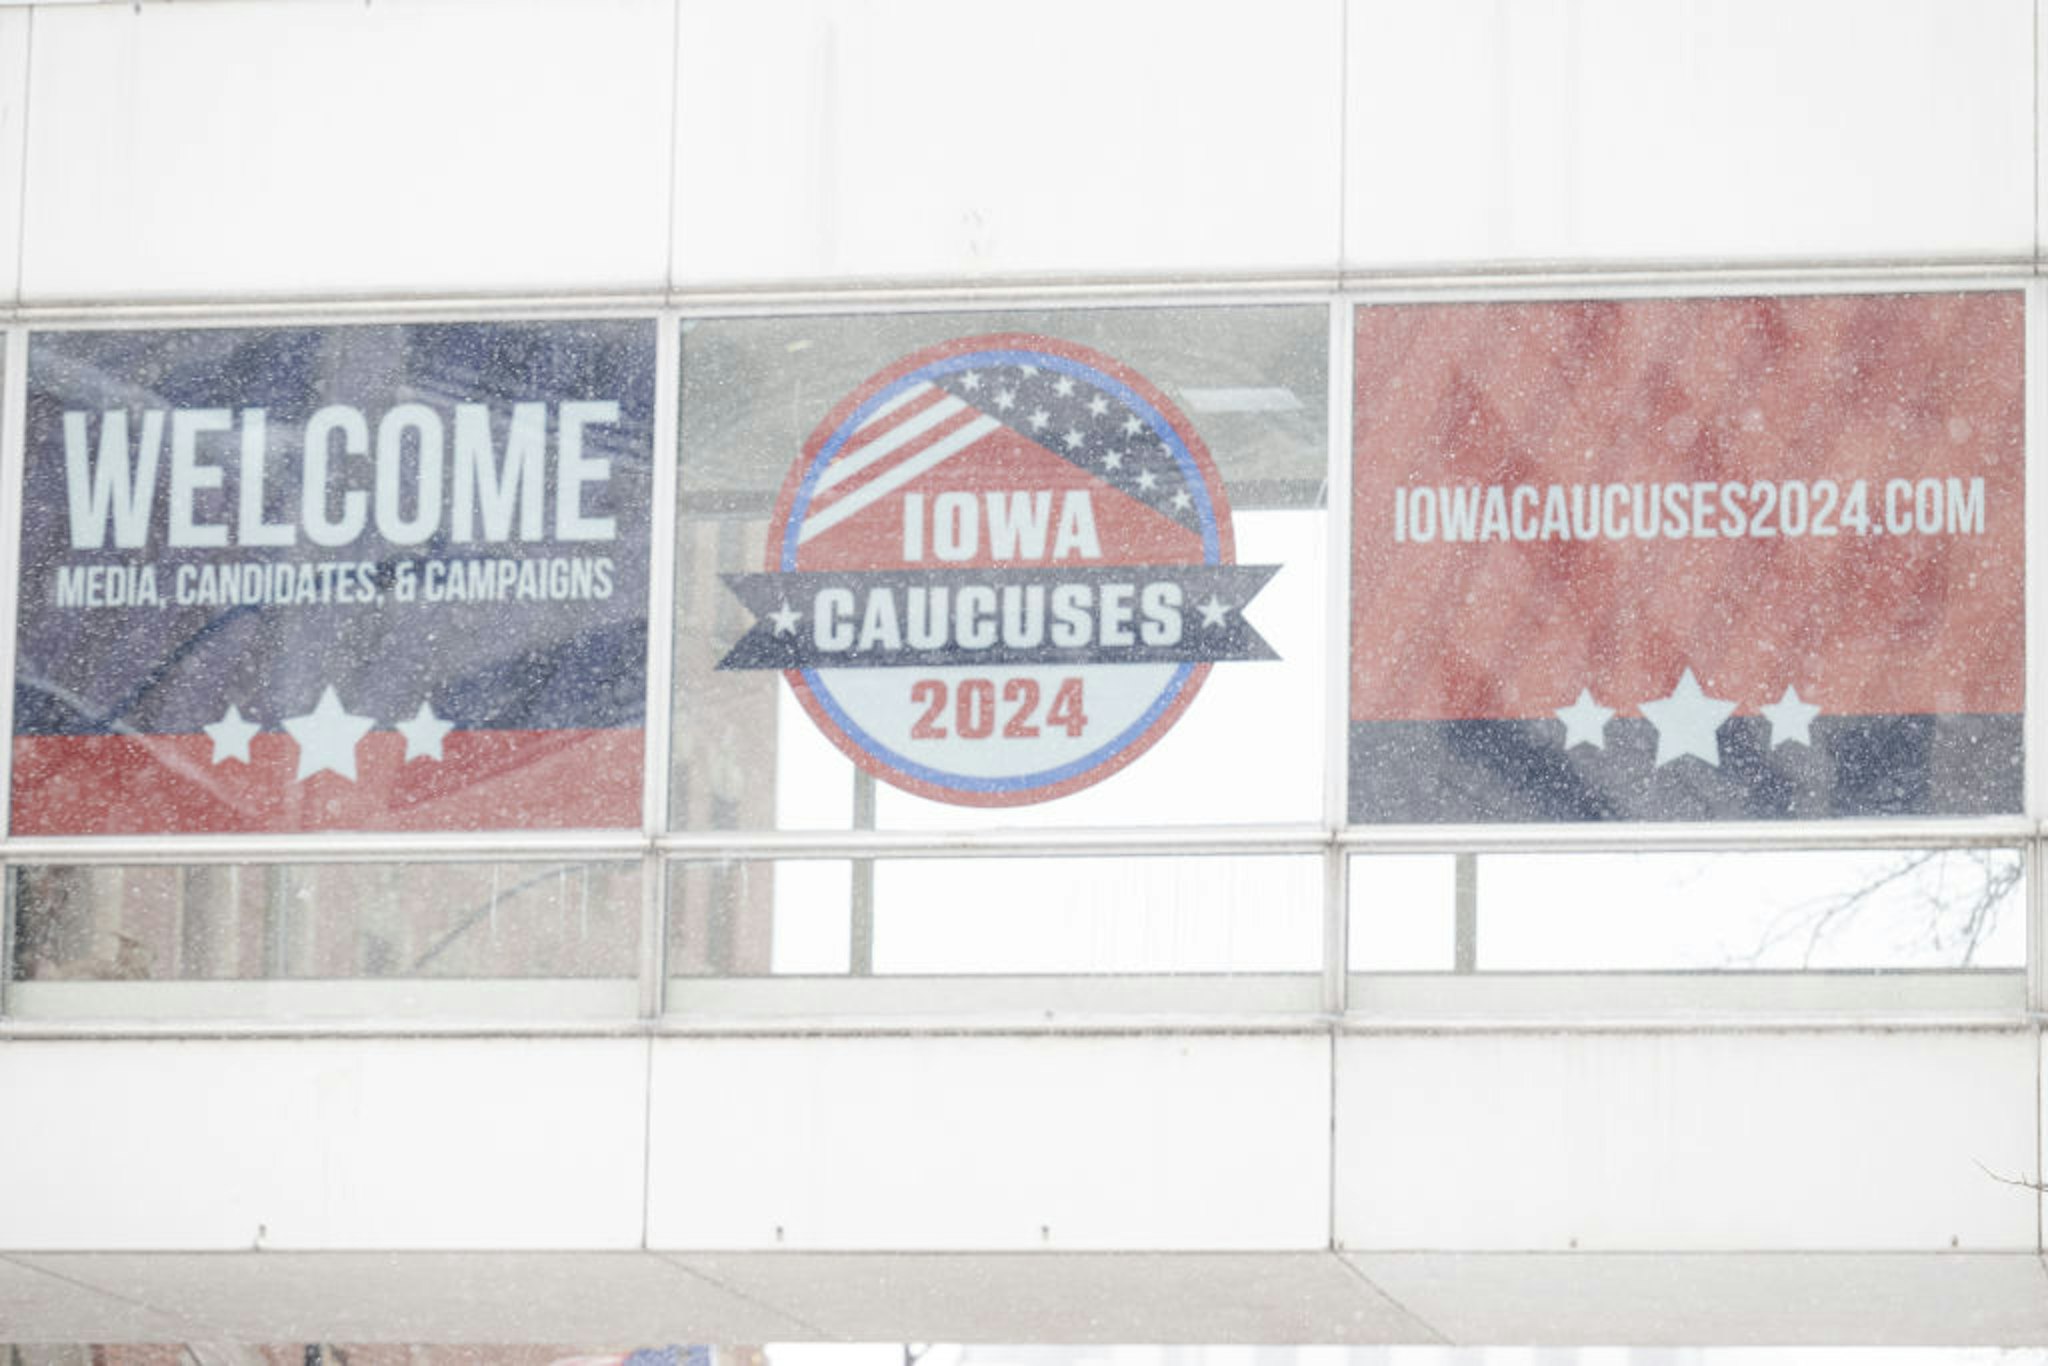 Signage ahead of the Iowa caucus in Des Moines, Iowa, US, on Friday, Jan. 12, 2024. The polar vortex is about to unleash an Arctic chill across much of the US this weekend, leaving football fans shivering in the Midwest and inflicting subzero temperatures on Iowa voters just before the state's caucus begins.